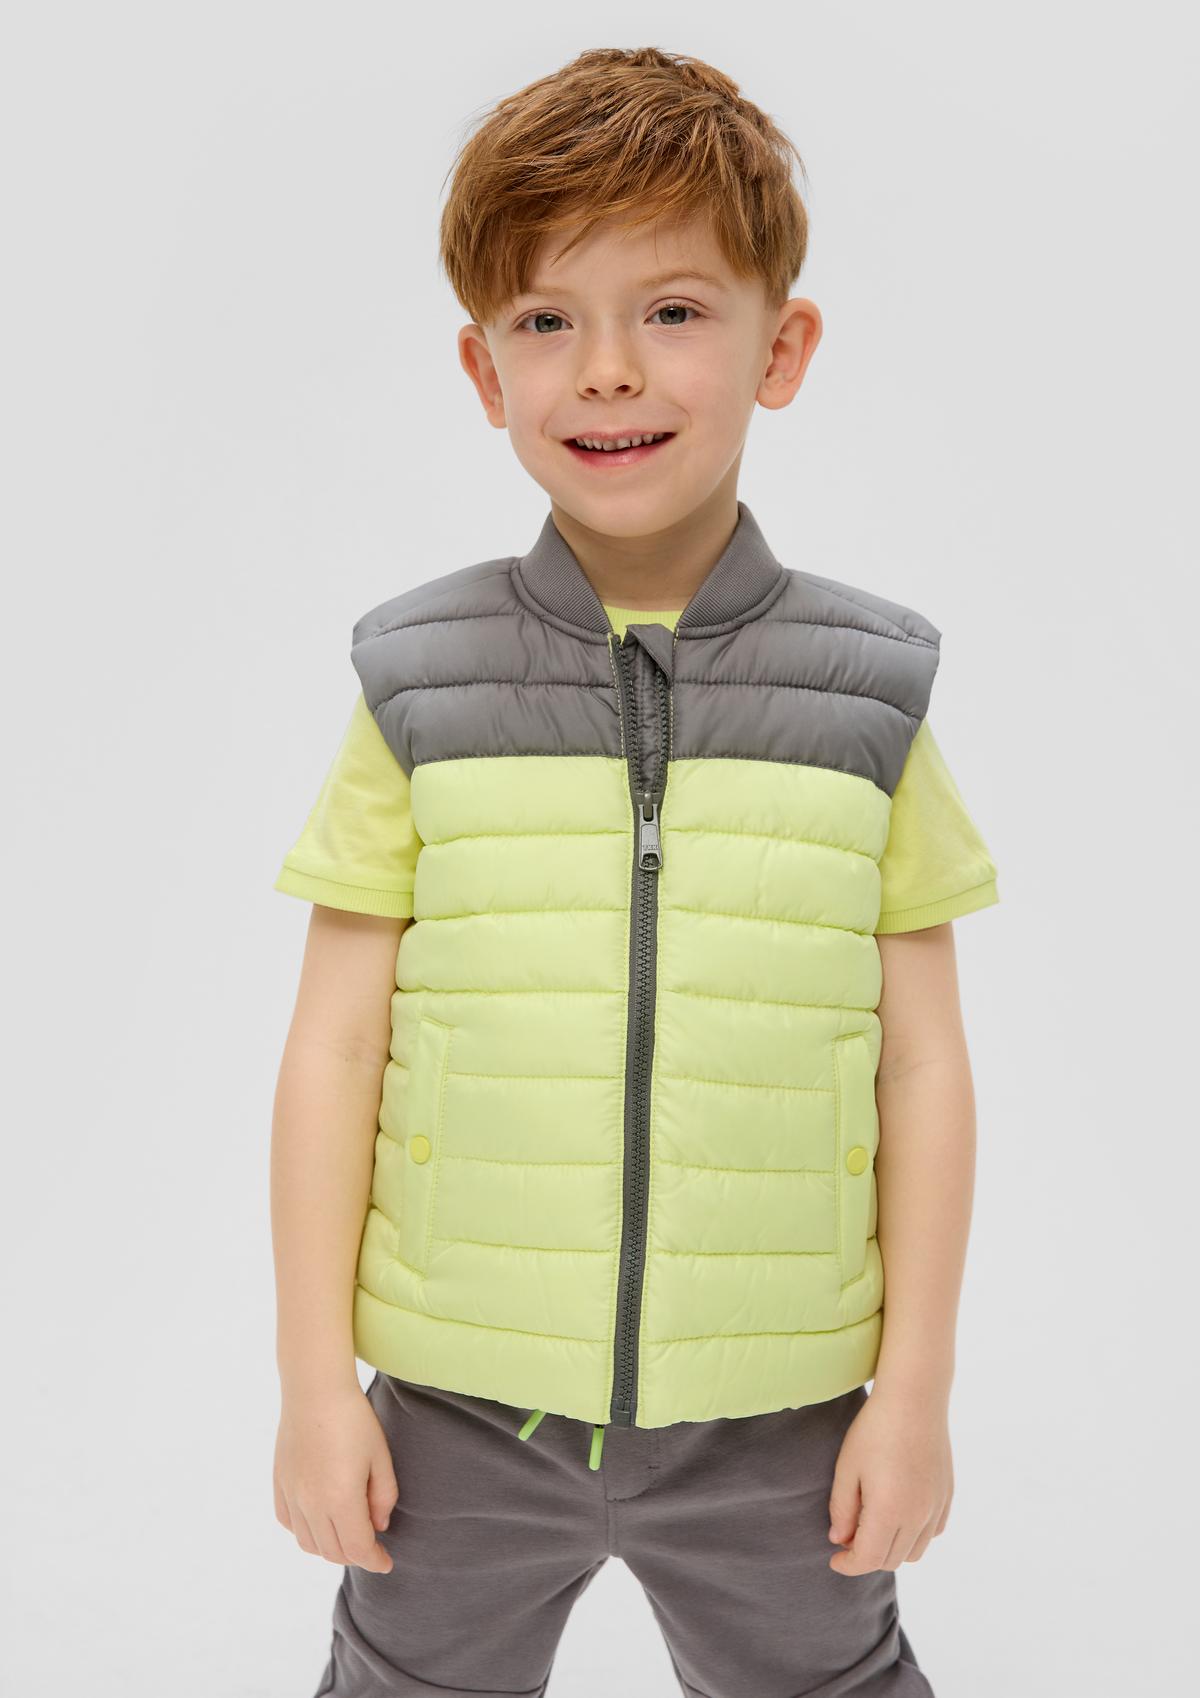 Body warmer with a stand-up collar